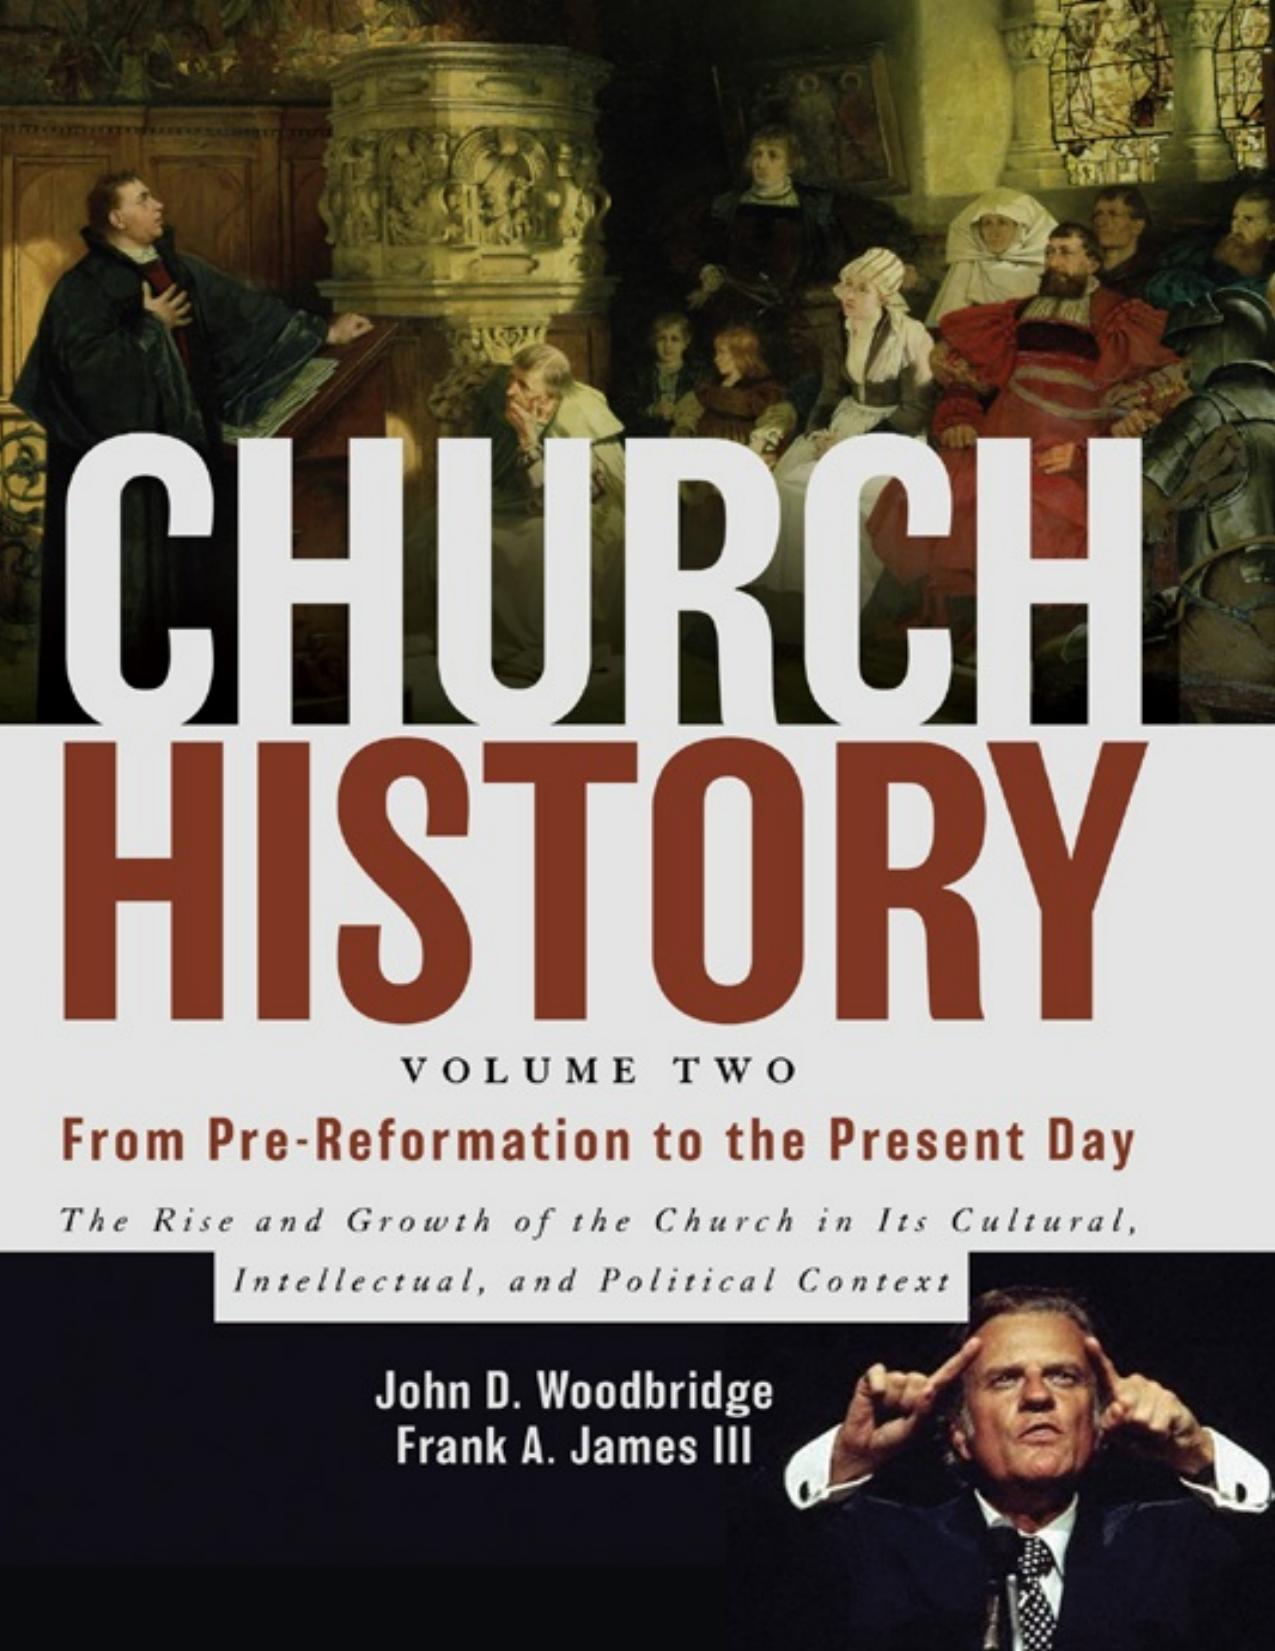 Church History, Volume Two: From Pre-Reformation to the Present Day: The Rise and Growth of the Church in Its Cultural, Intellectual, and Political Context - PDFDrive.com